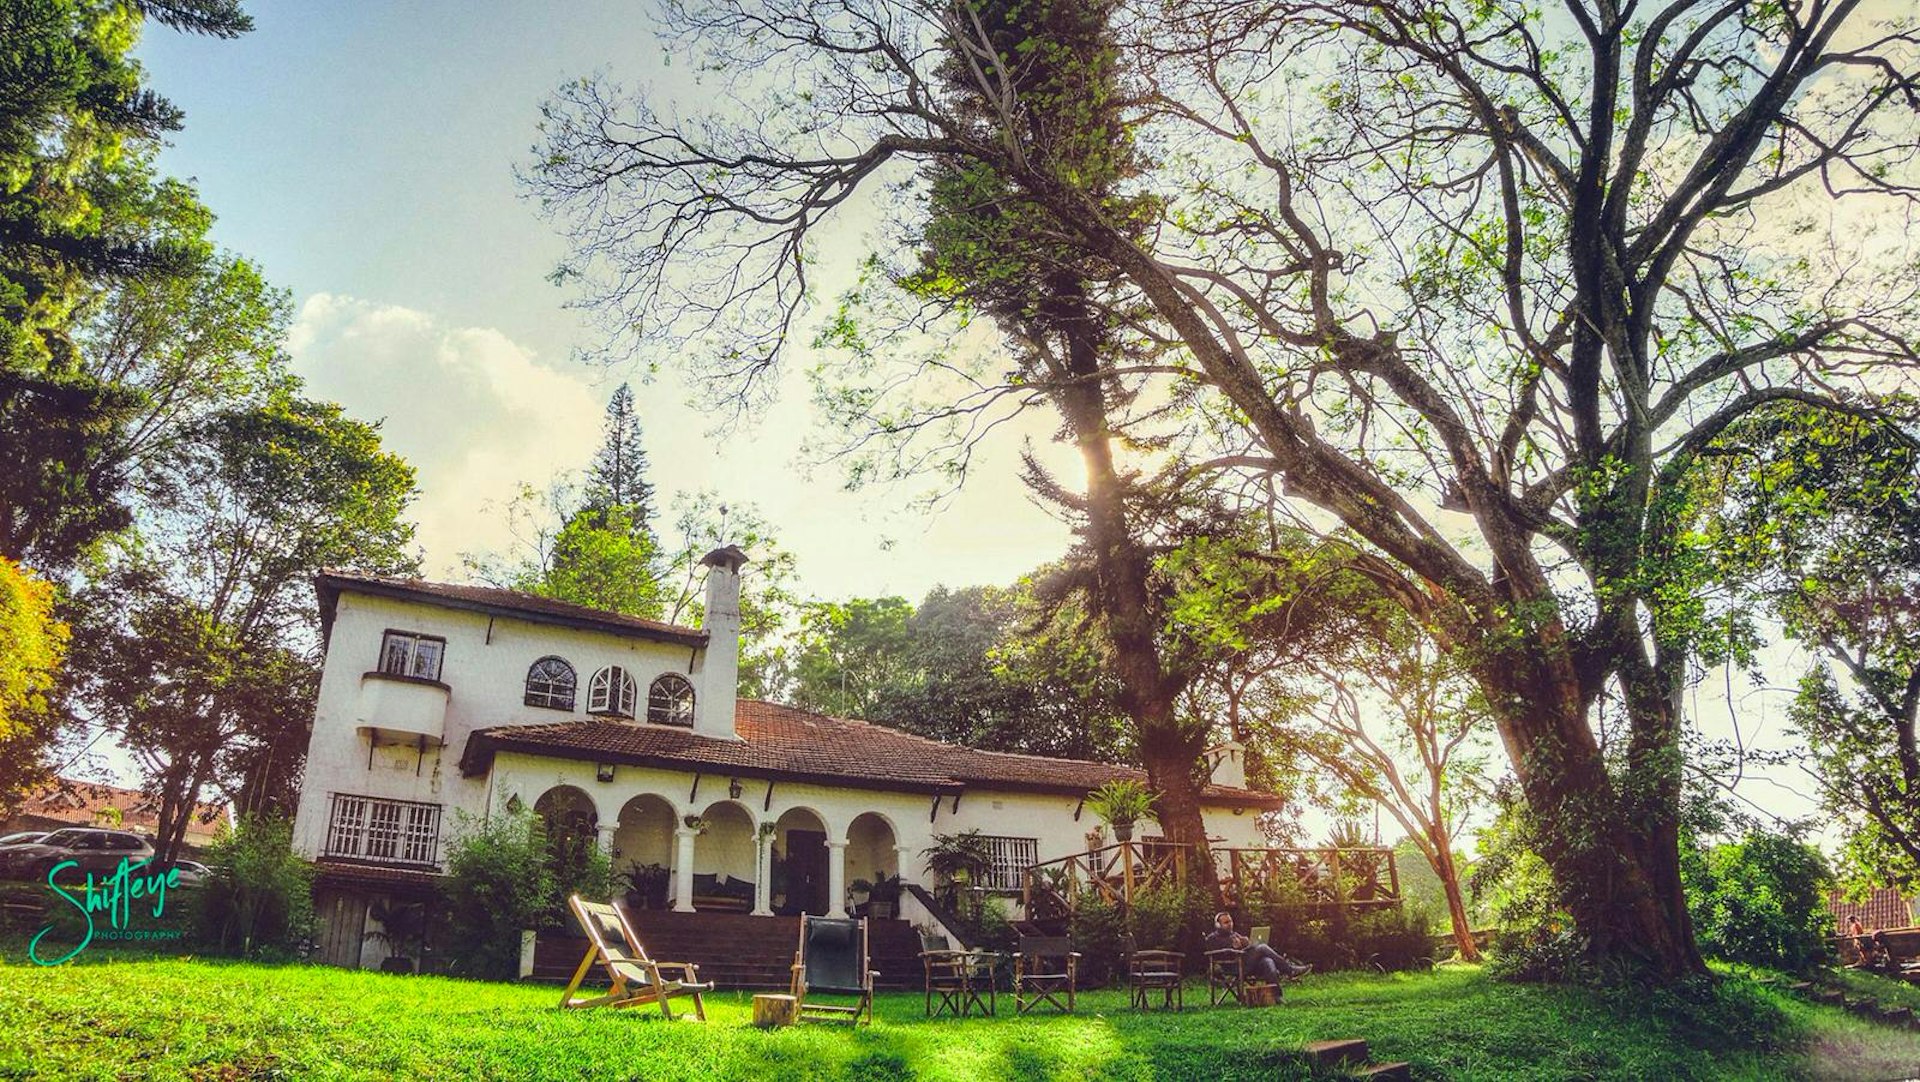 Nairobi June - A stately mansion with arches over its verandah sits beneath trees, with lovely lawns in the foreground; yoga here is one of the best things to do in Nairobi in June